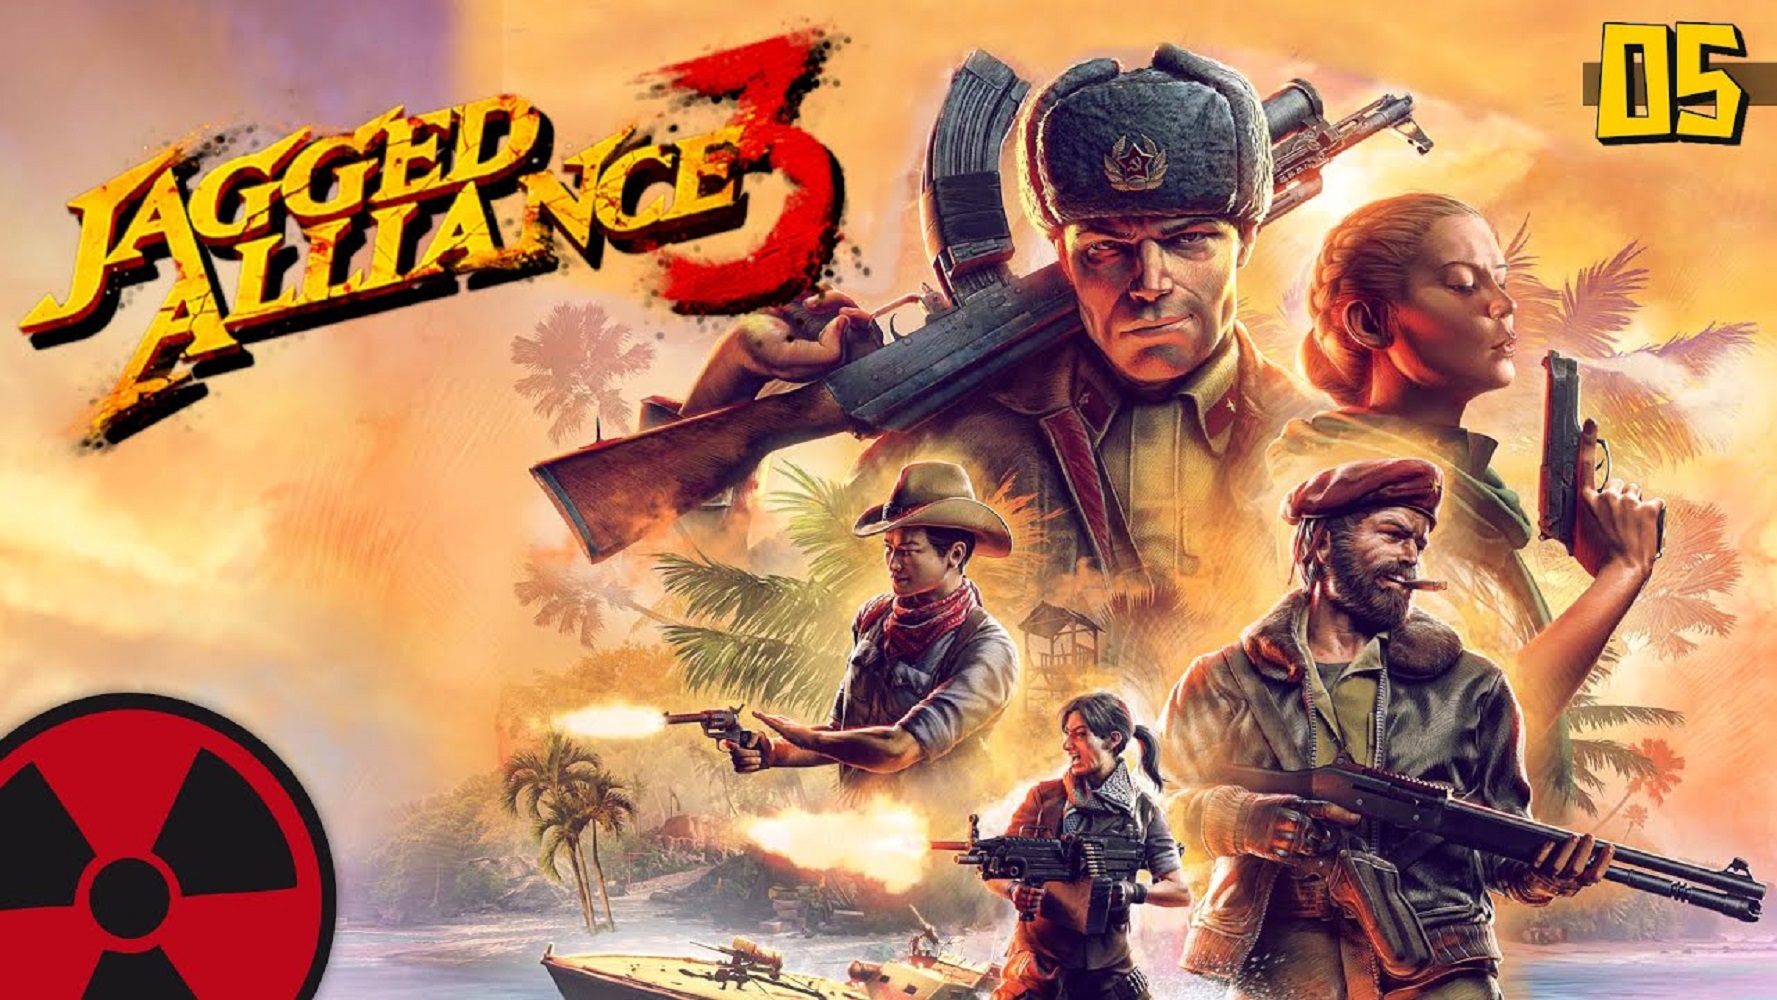 THQ Nordic officially announced a release date for Jagged Alliance 3 on PC